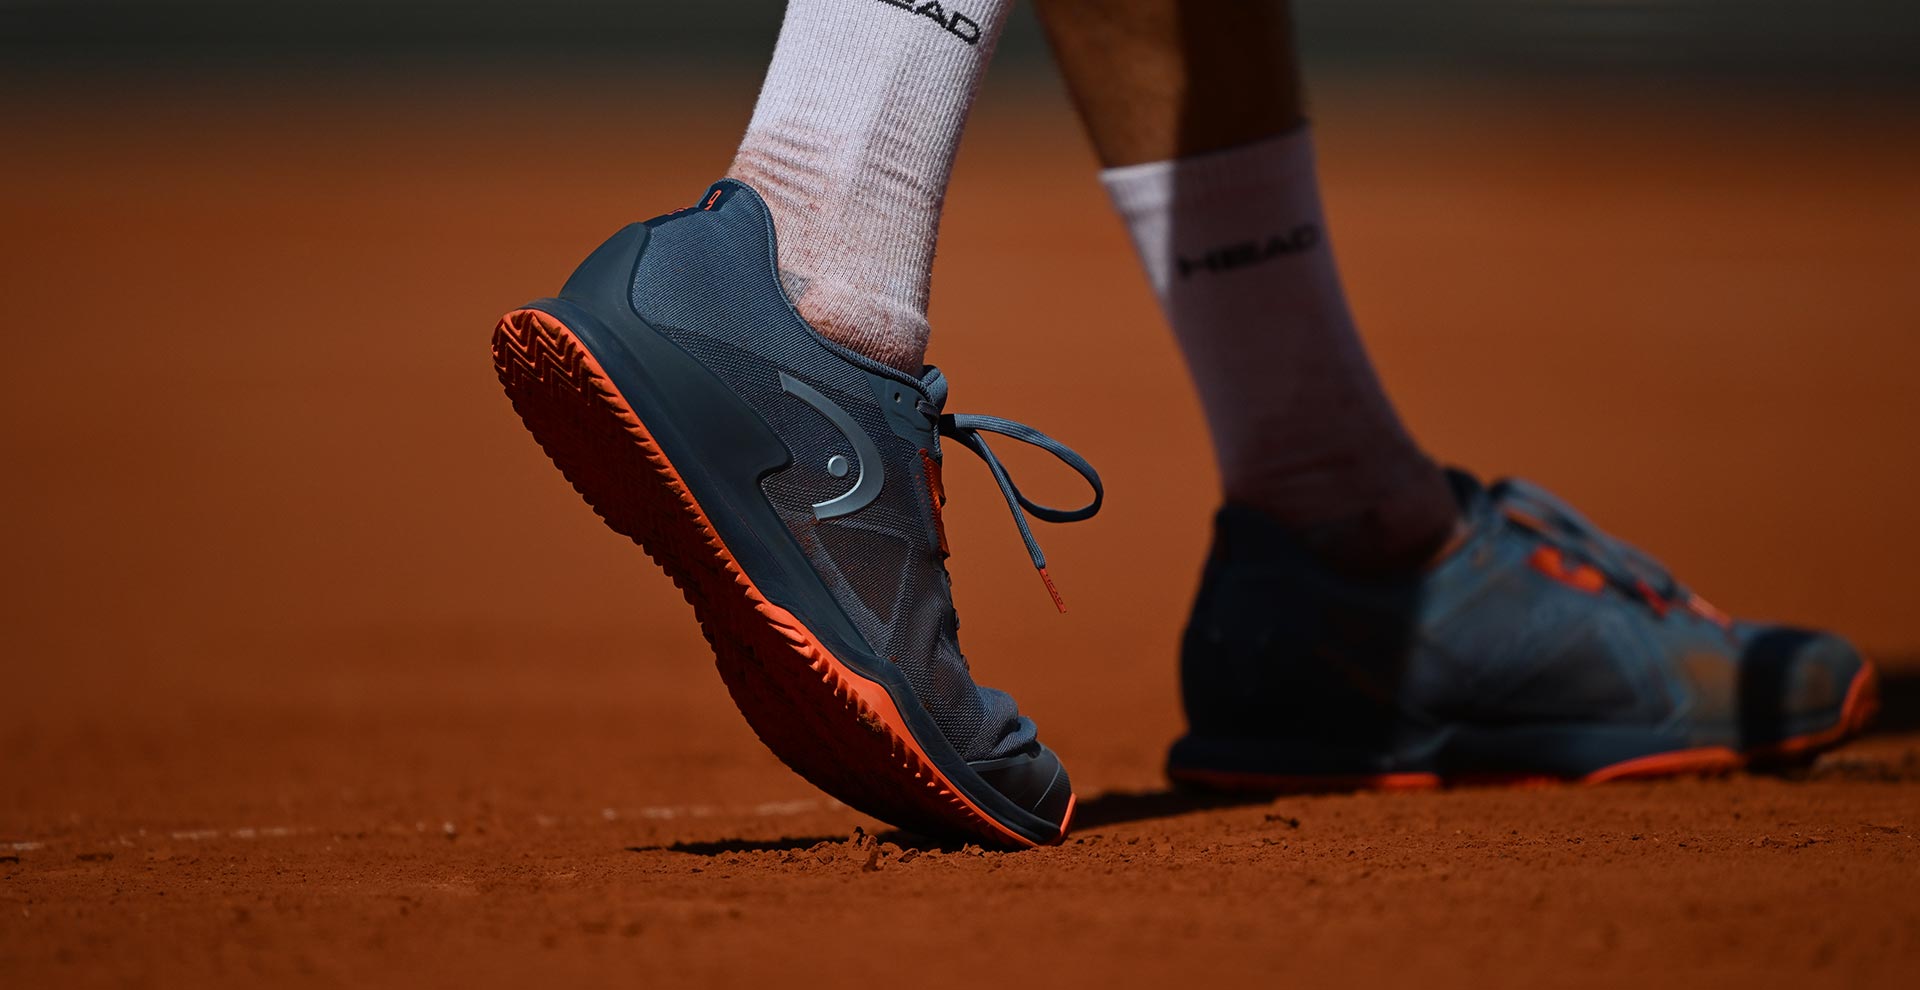 clay court tennis shoes